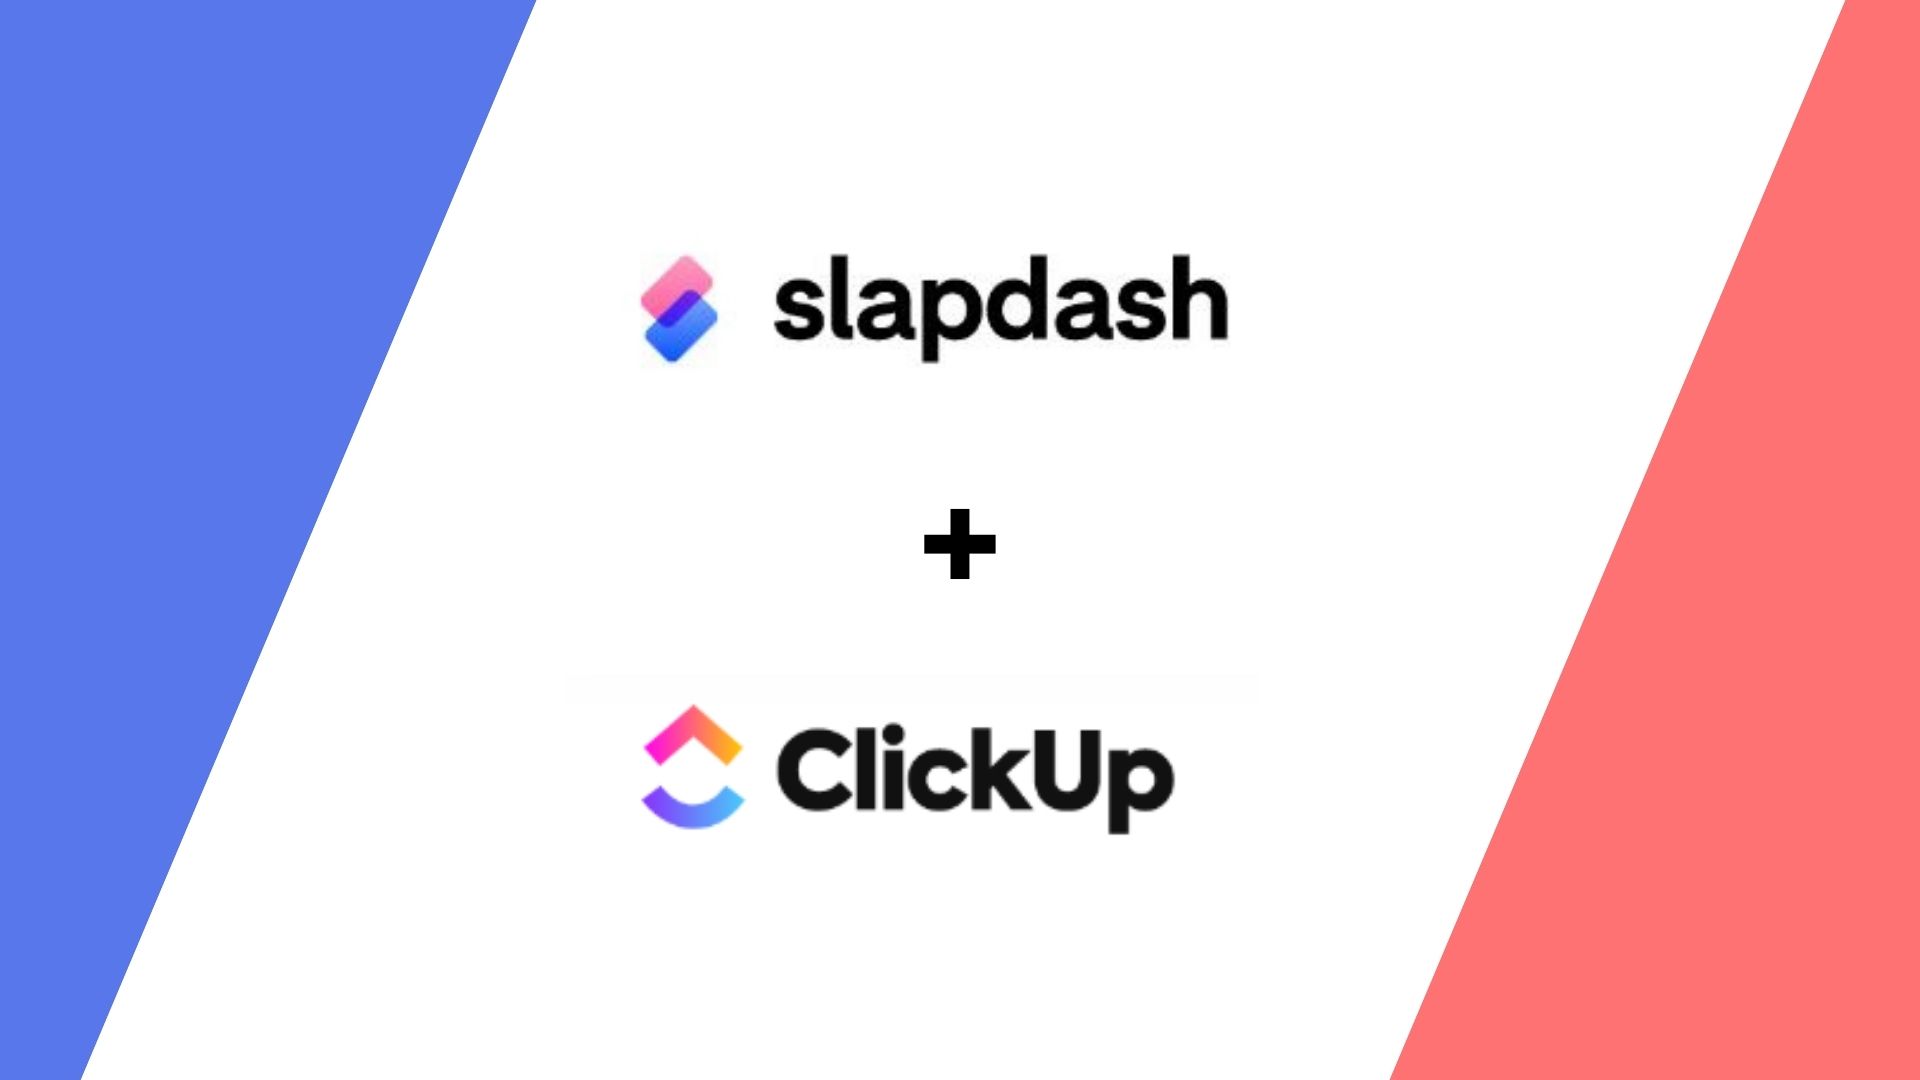 Slapdash acquired by ClickUp